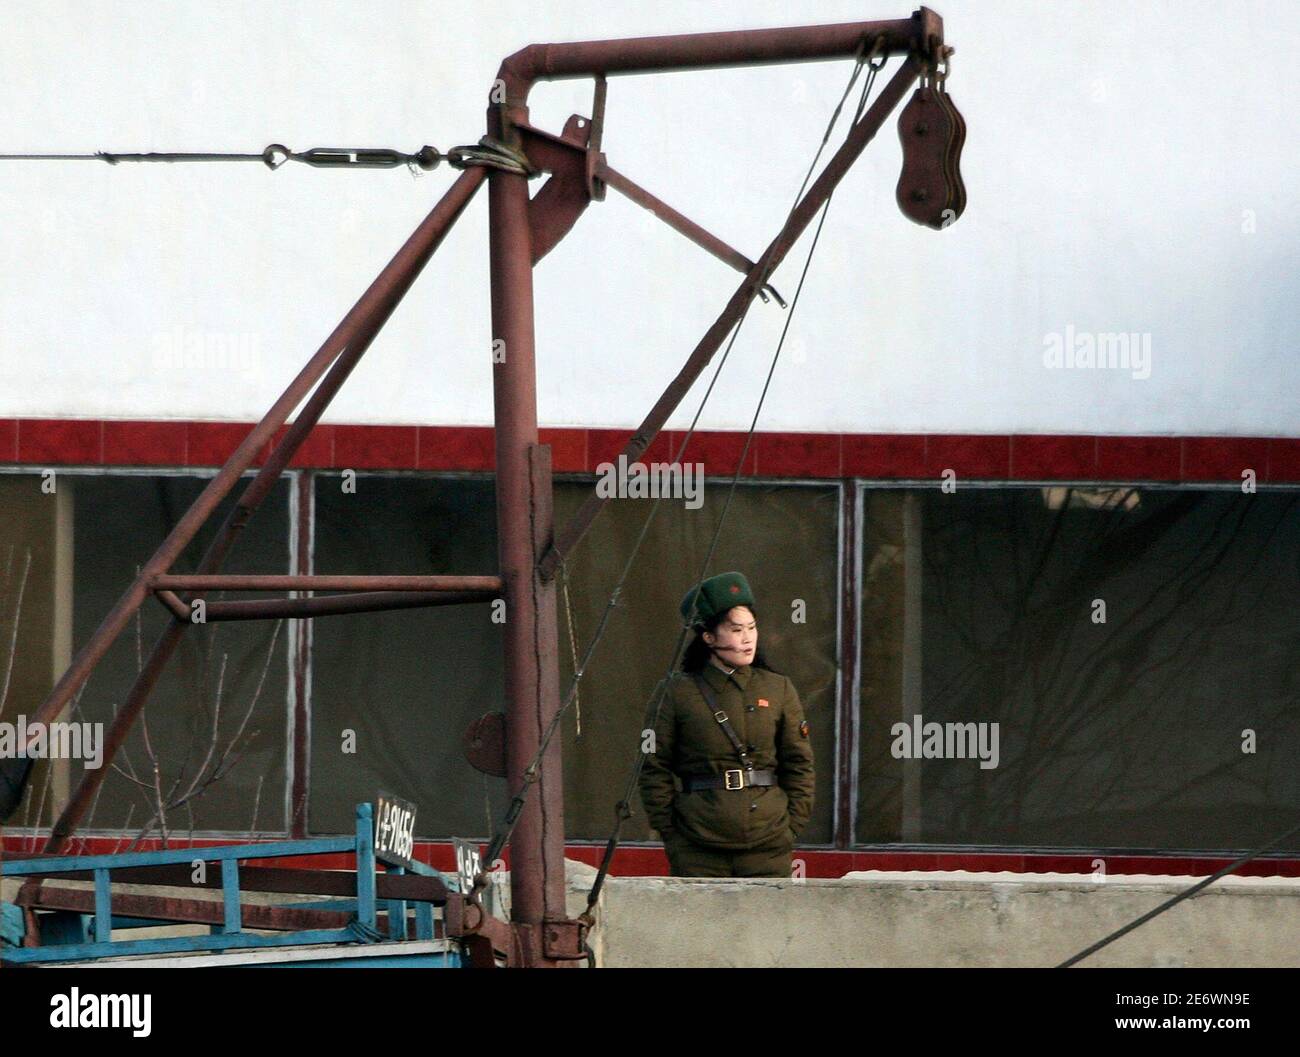 A North Korean soldier guards the banks of the Yalu River near the North Korean town of Sinuiju, opposite the Chinese border city of Dandong, March 25, 2010. North Korea's leader Kim Jong-il may soon visit China, bolstering ties between the two neighbours while regional powers and Washington seek to draw Pyongyang back to nuclear disarmament talks. Picture taken March 25, 2010. REUTERS/Jacky Chen (NORTH KOREA - Tags: POLITICS MILITARY) Stock Photo